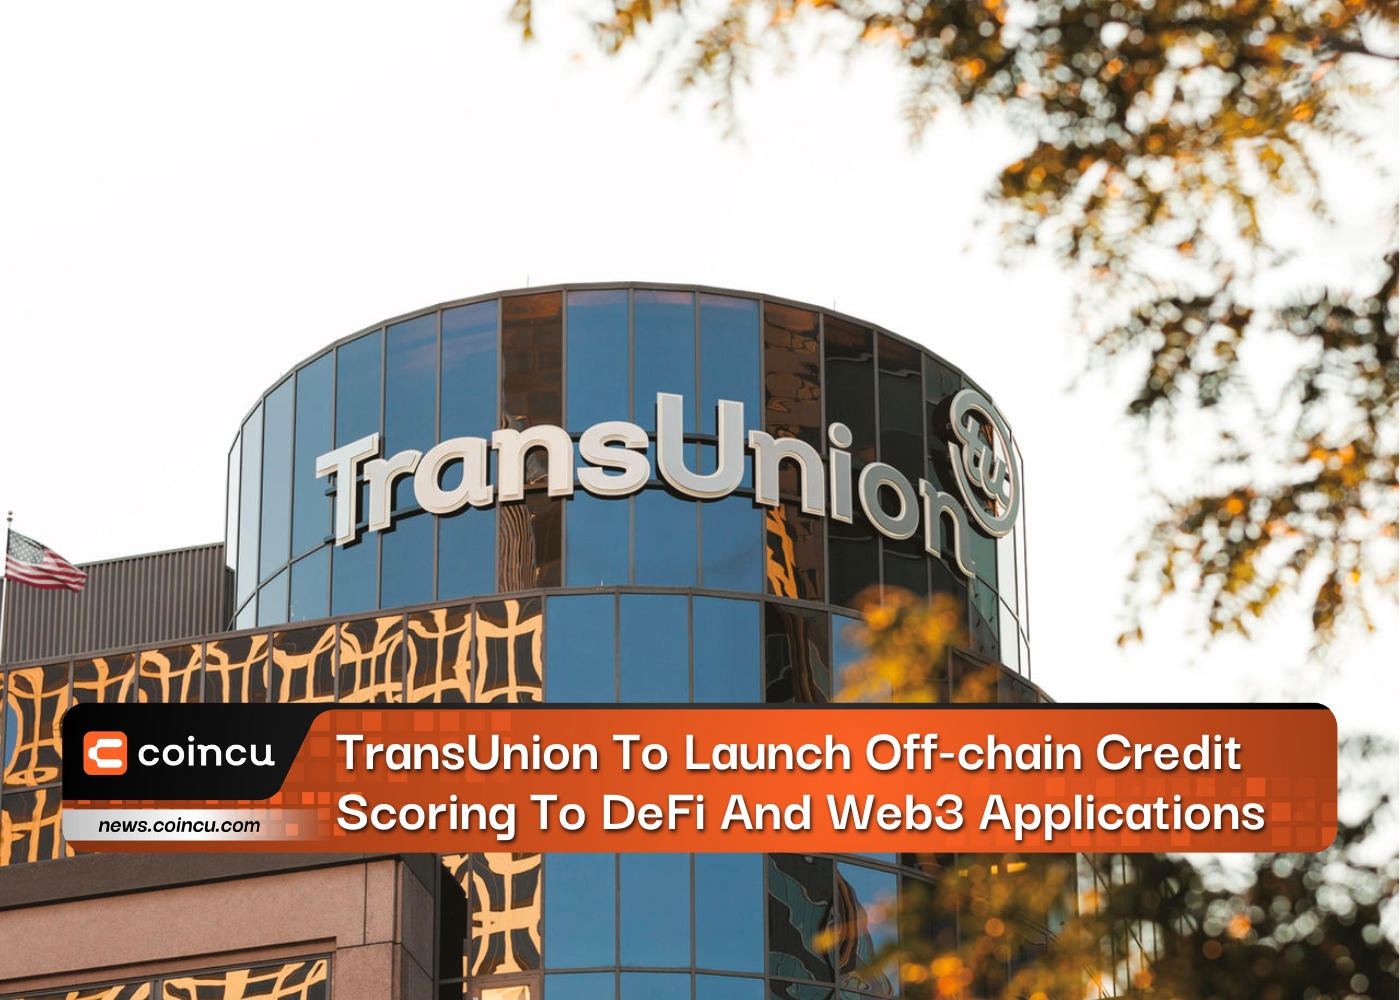 TransUnion To Launch Off-chain Credit Scoring To DeFi And Web3 Applications